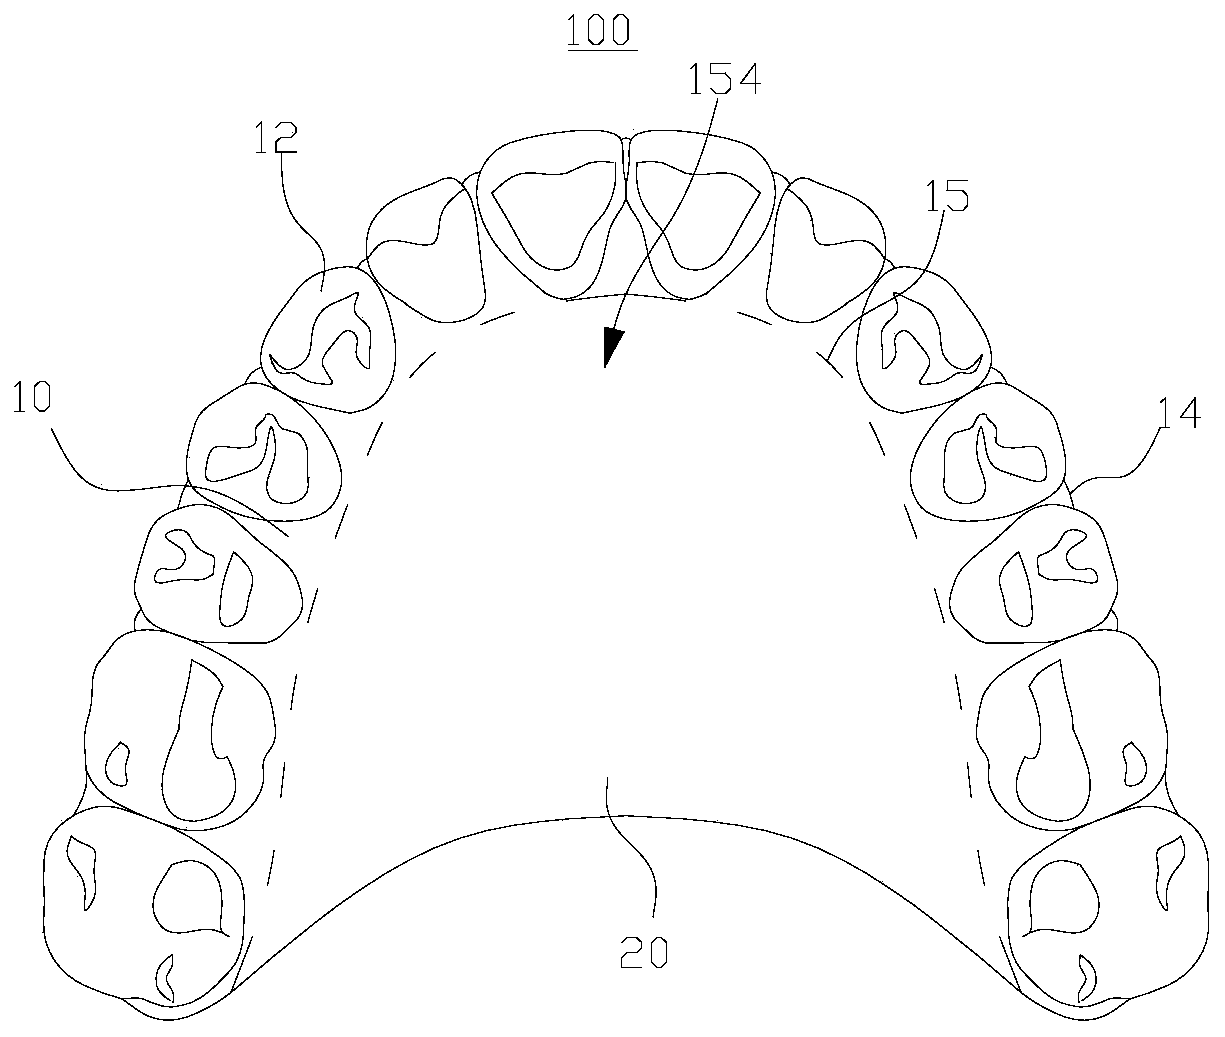 Maxillary expansion tooth socket and processing method